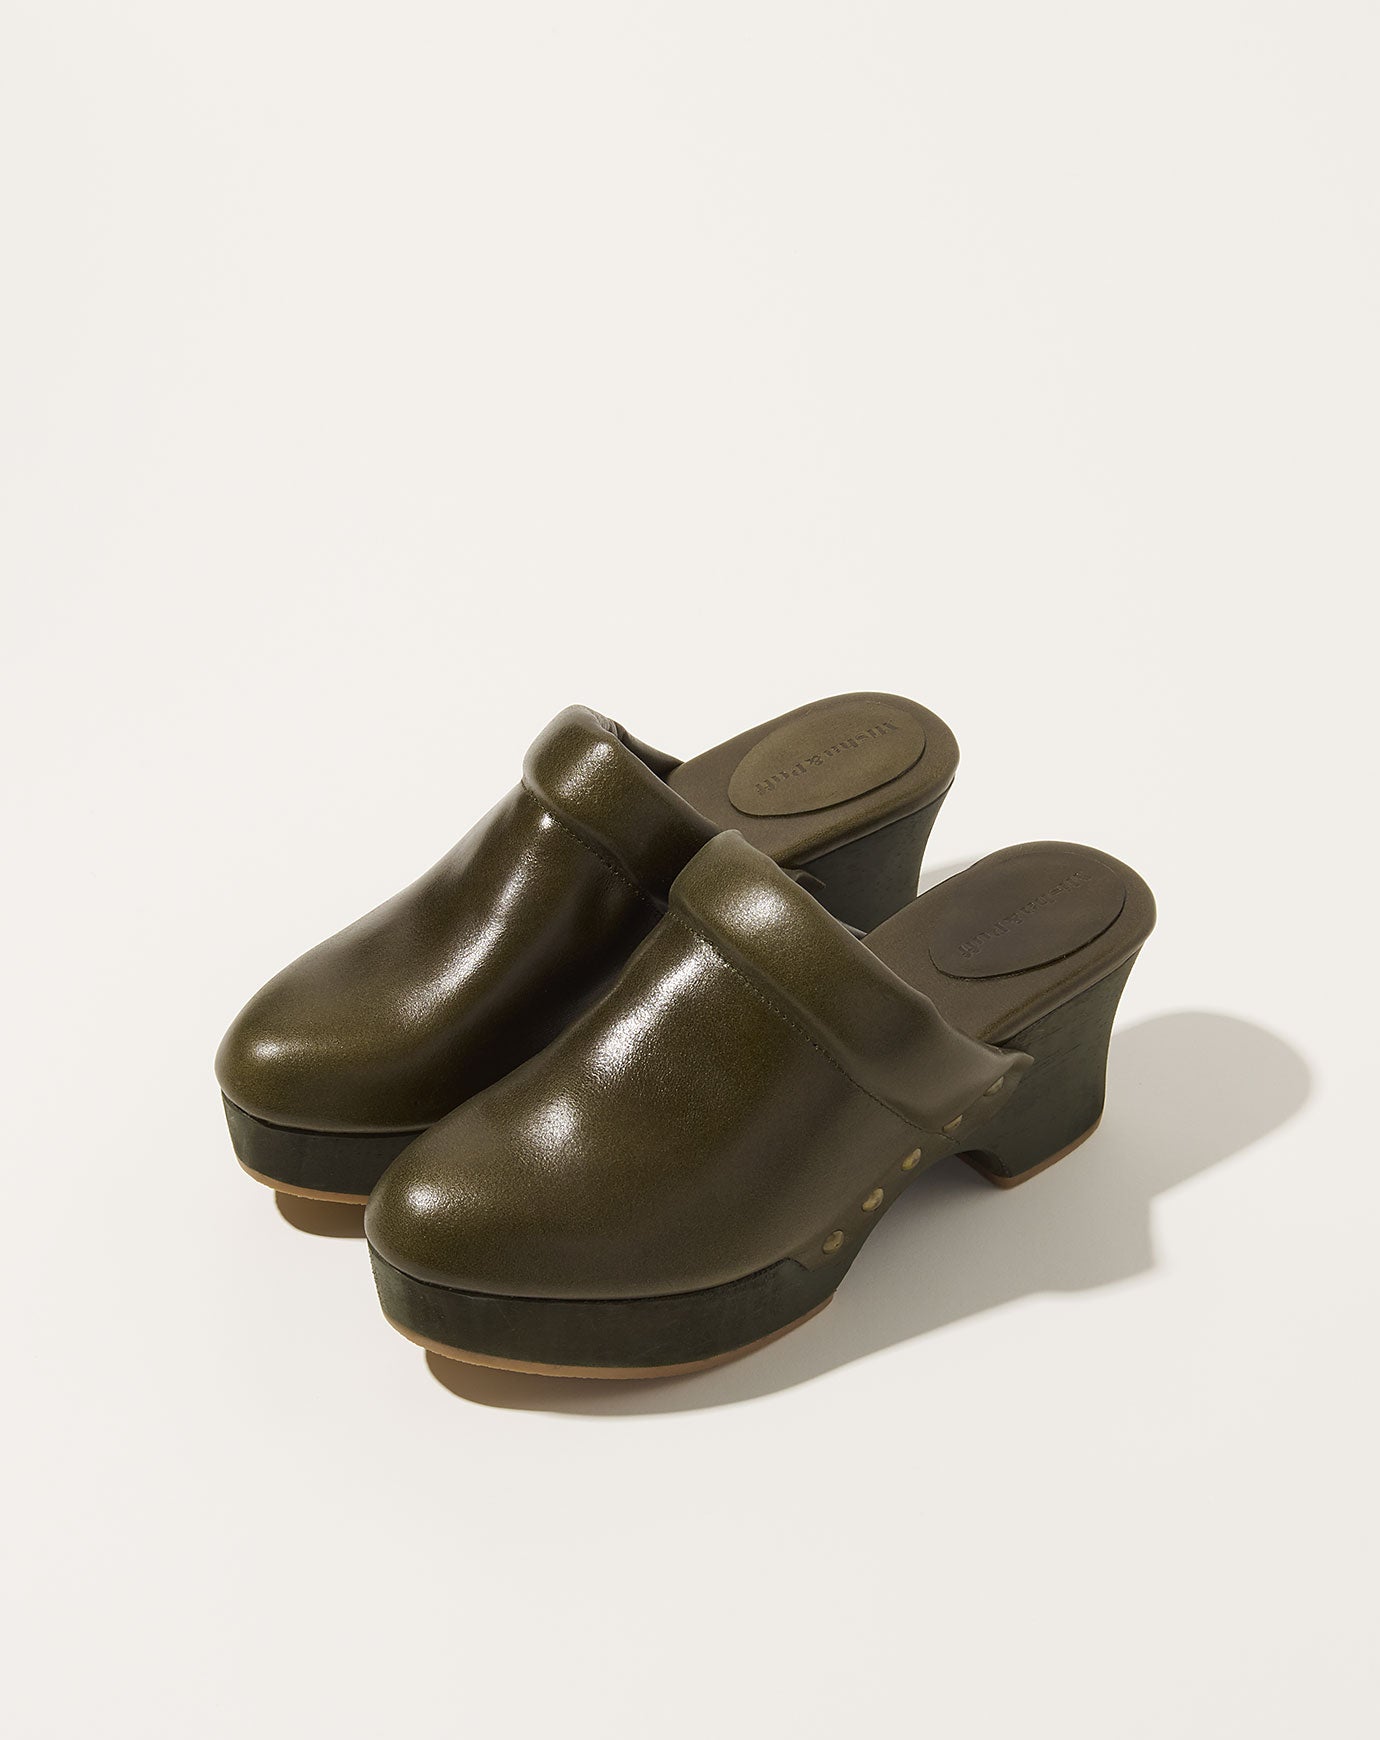 Misha & Puff Pillow Clog in Olive